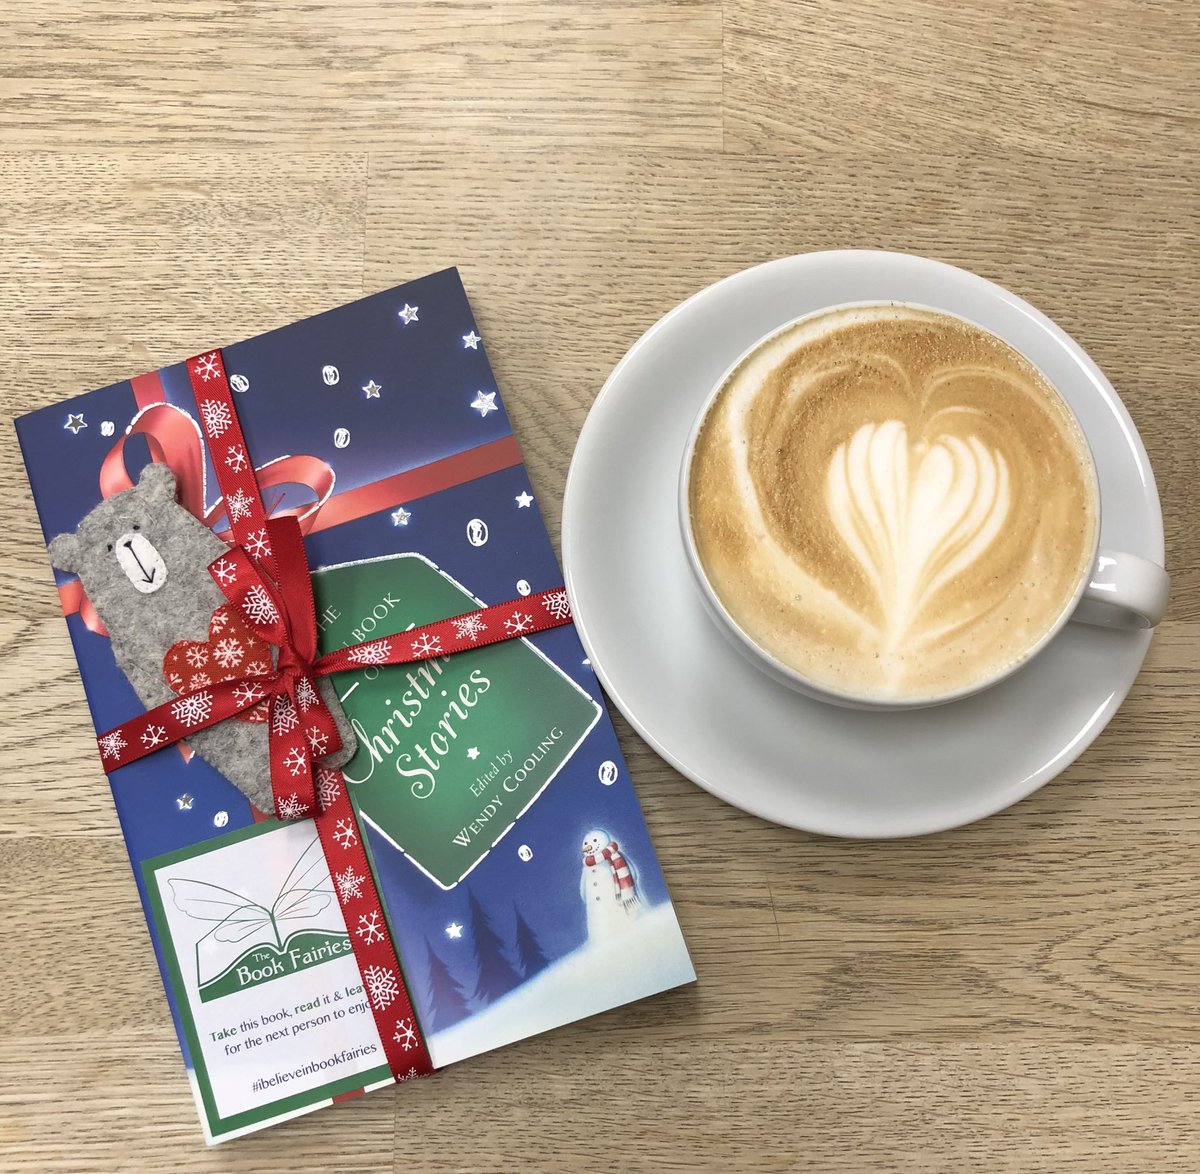 In support of #SmallBusinessSaturday a copy Christmas Stories was left @cafe_matchbox #northampton with a free festive book mark. Merry Christmas 🎄❤️🎅🧚‍♀️
#ibelieveinbookfaries @the_bookfairies